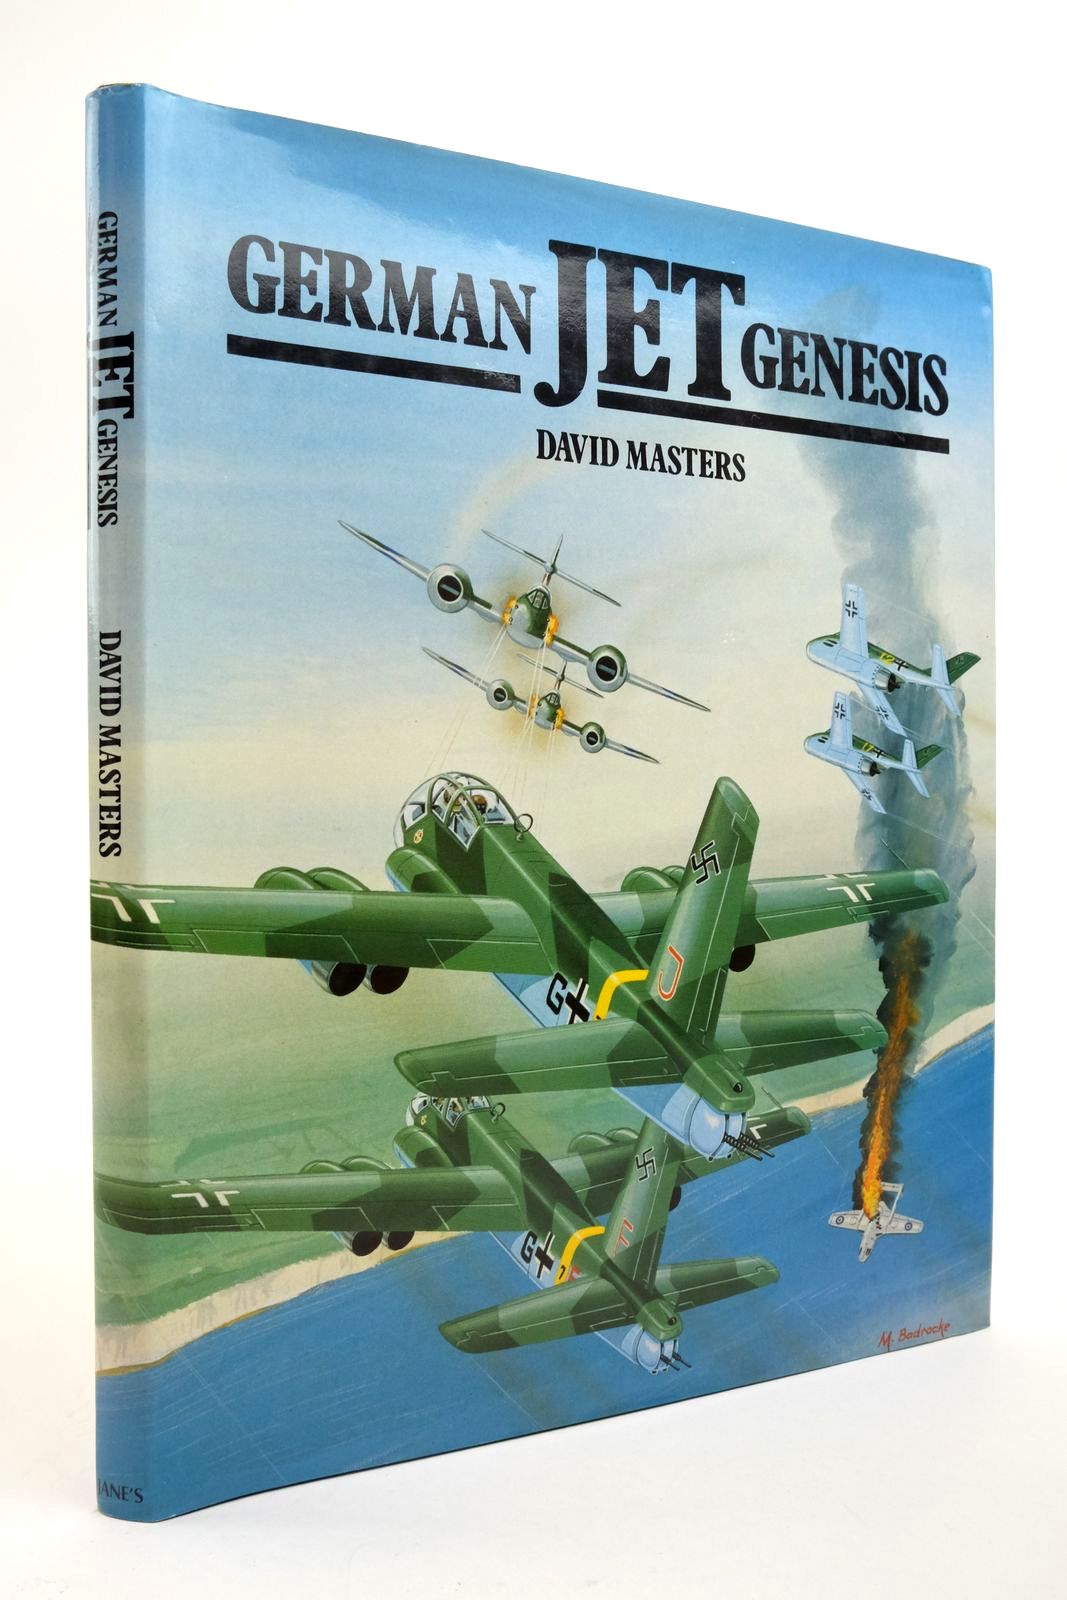 Photo of GERMAN JET GENESIS written by Masters, David published by Janes Publishing Co. Ltd. (STOCK CODE: 2138475)  for sale by Stella & Rose's Books